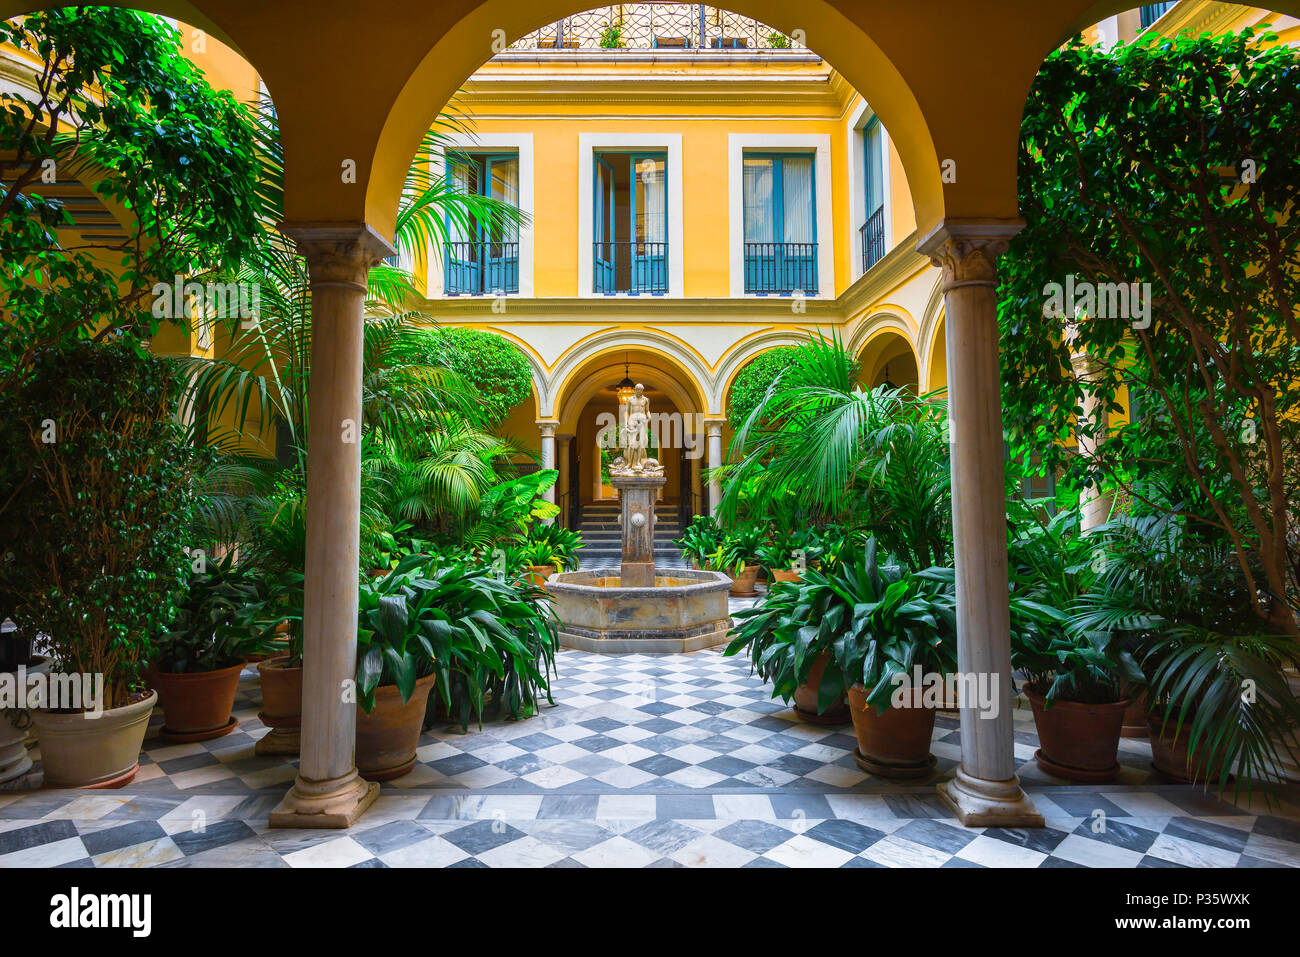 Andalucia Spain house, a typical Andalucian courtyard and patio (the Condes de Casa Galindo) in the old town quarter of Seville - Sevilla - Spain. Stock Photo